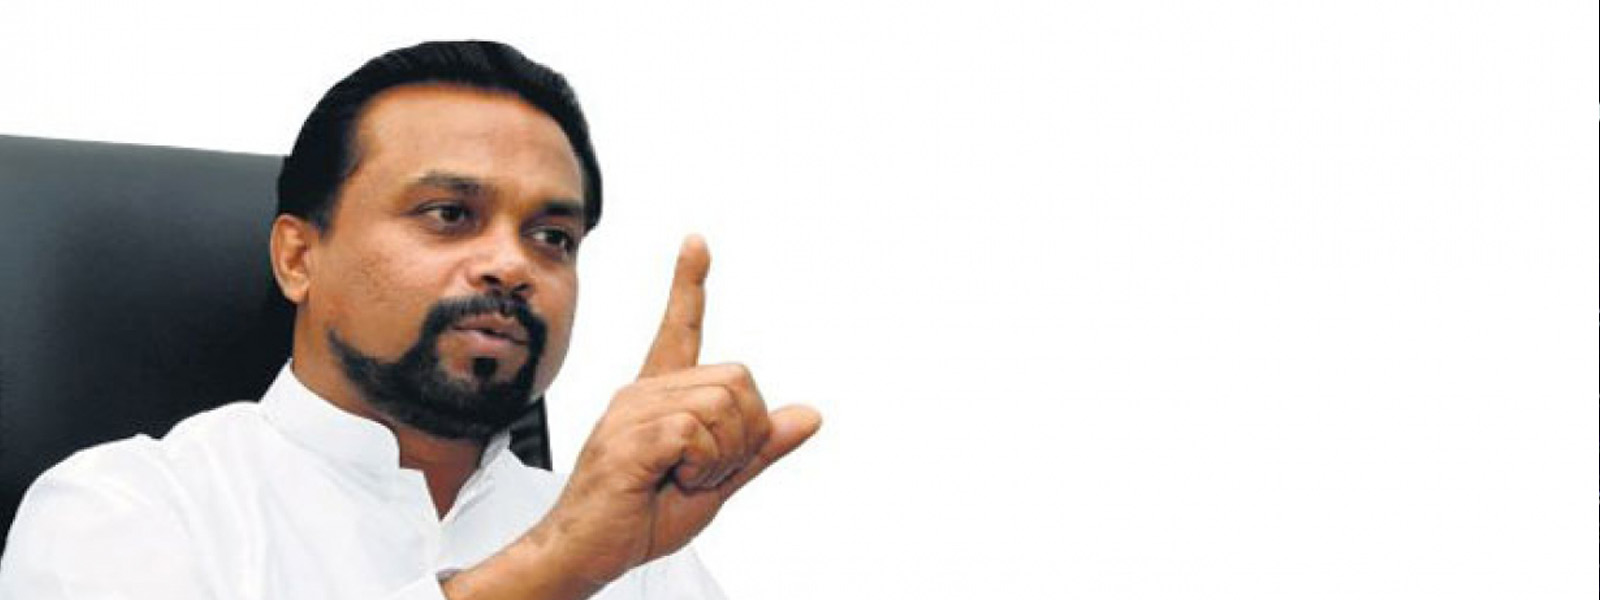 MP Weerawansa appeals to quash ruling on his book 